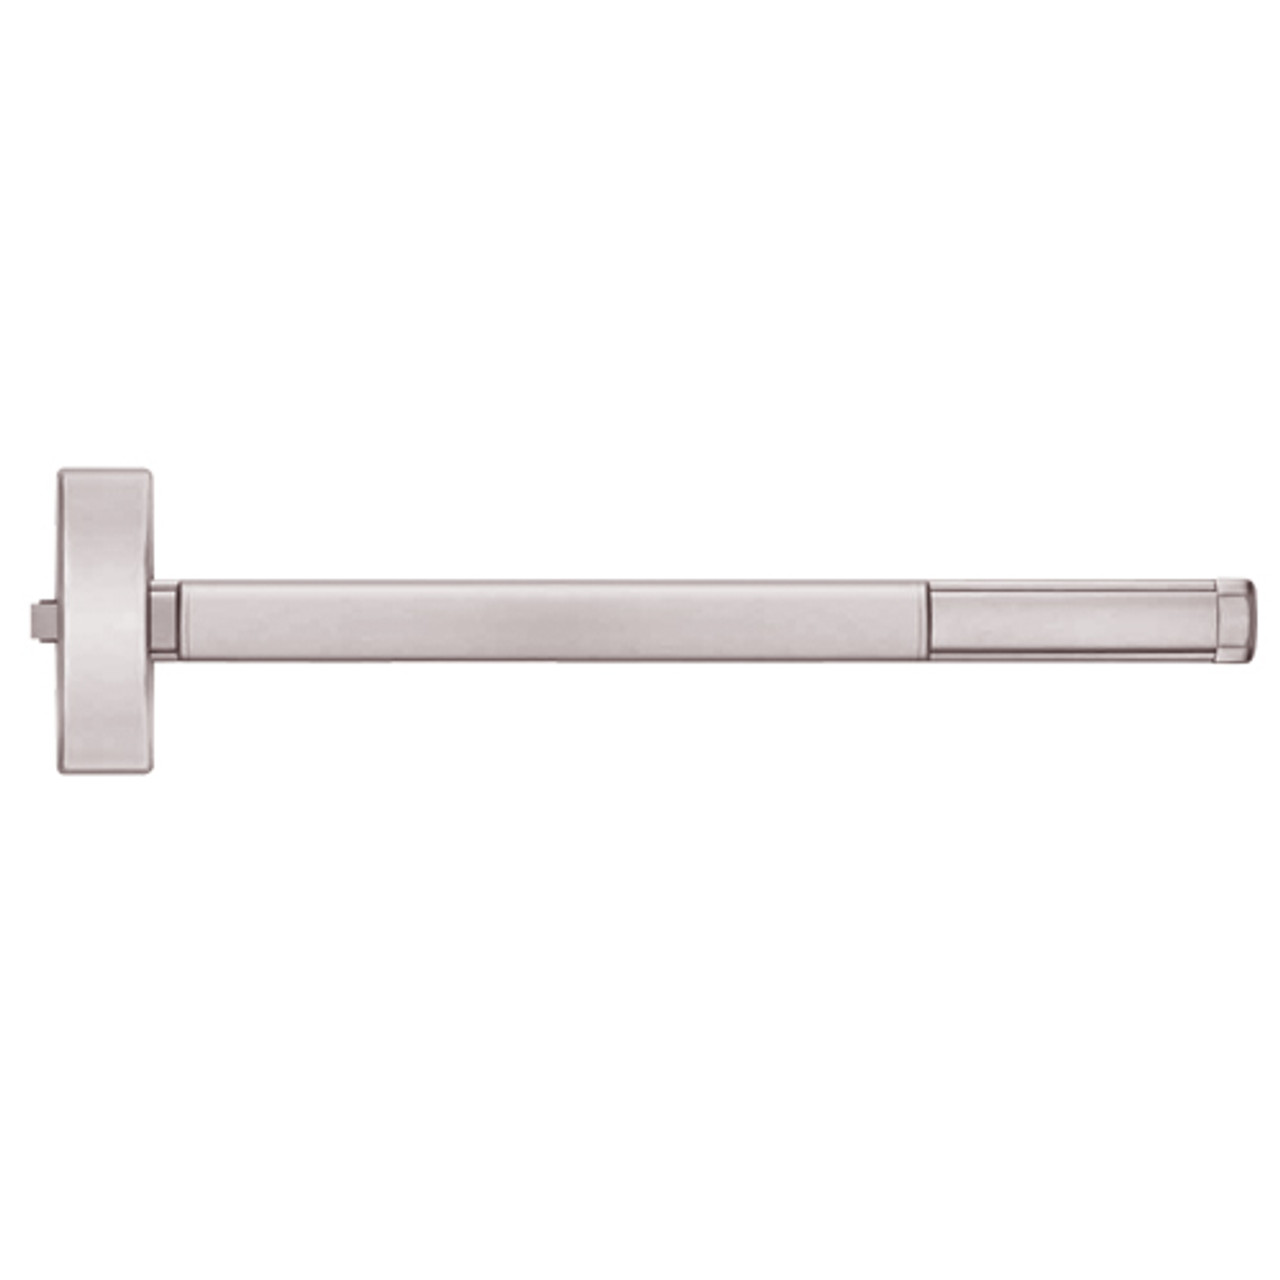 ELRFL2114-628-48 PHI 2100 Series Fire Rated Apex Rim Exit Device with Electric Latch Retraction Prepped for Lever-Knob Always Active in Satin Aluminum Finish